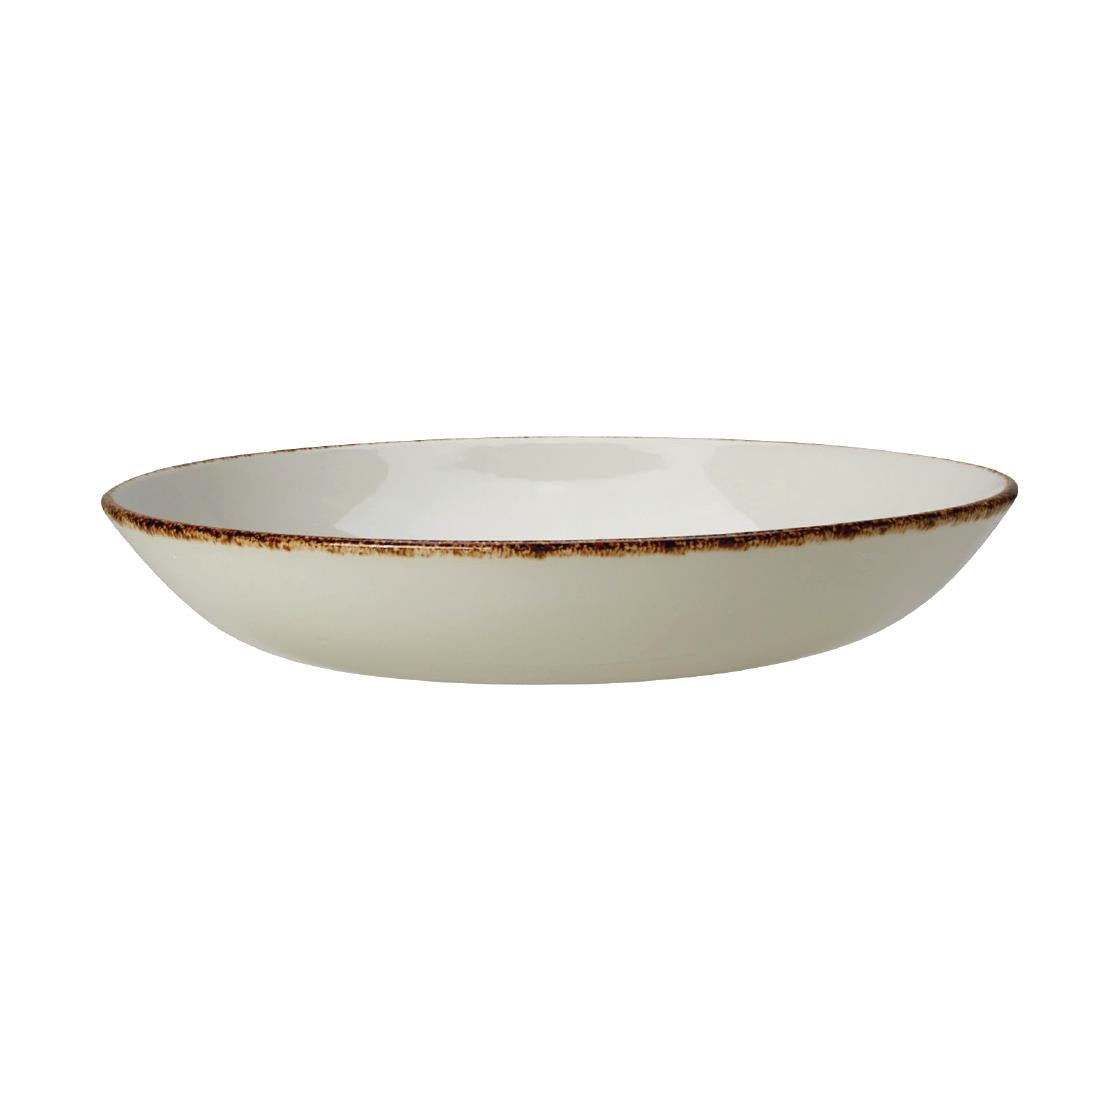 VV757 Steelite Brown Dapple Coupe Bowls 290mm (Pack of 6)